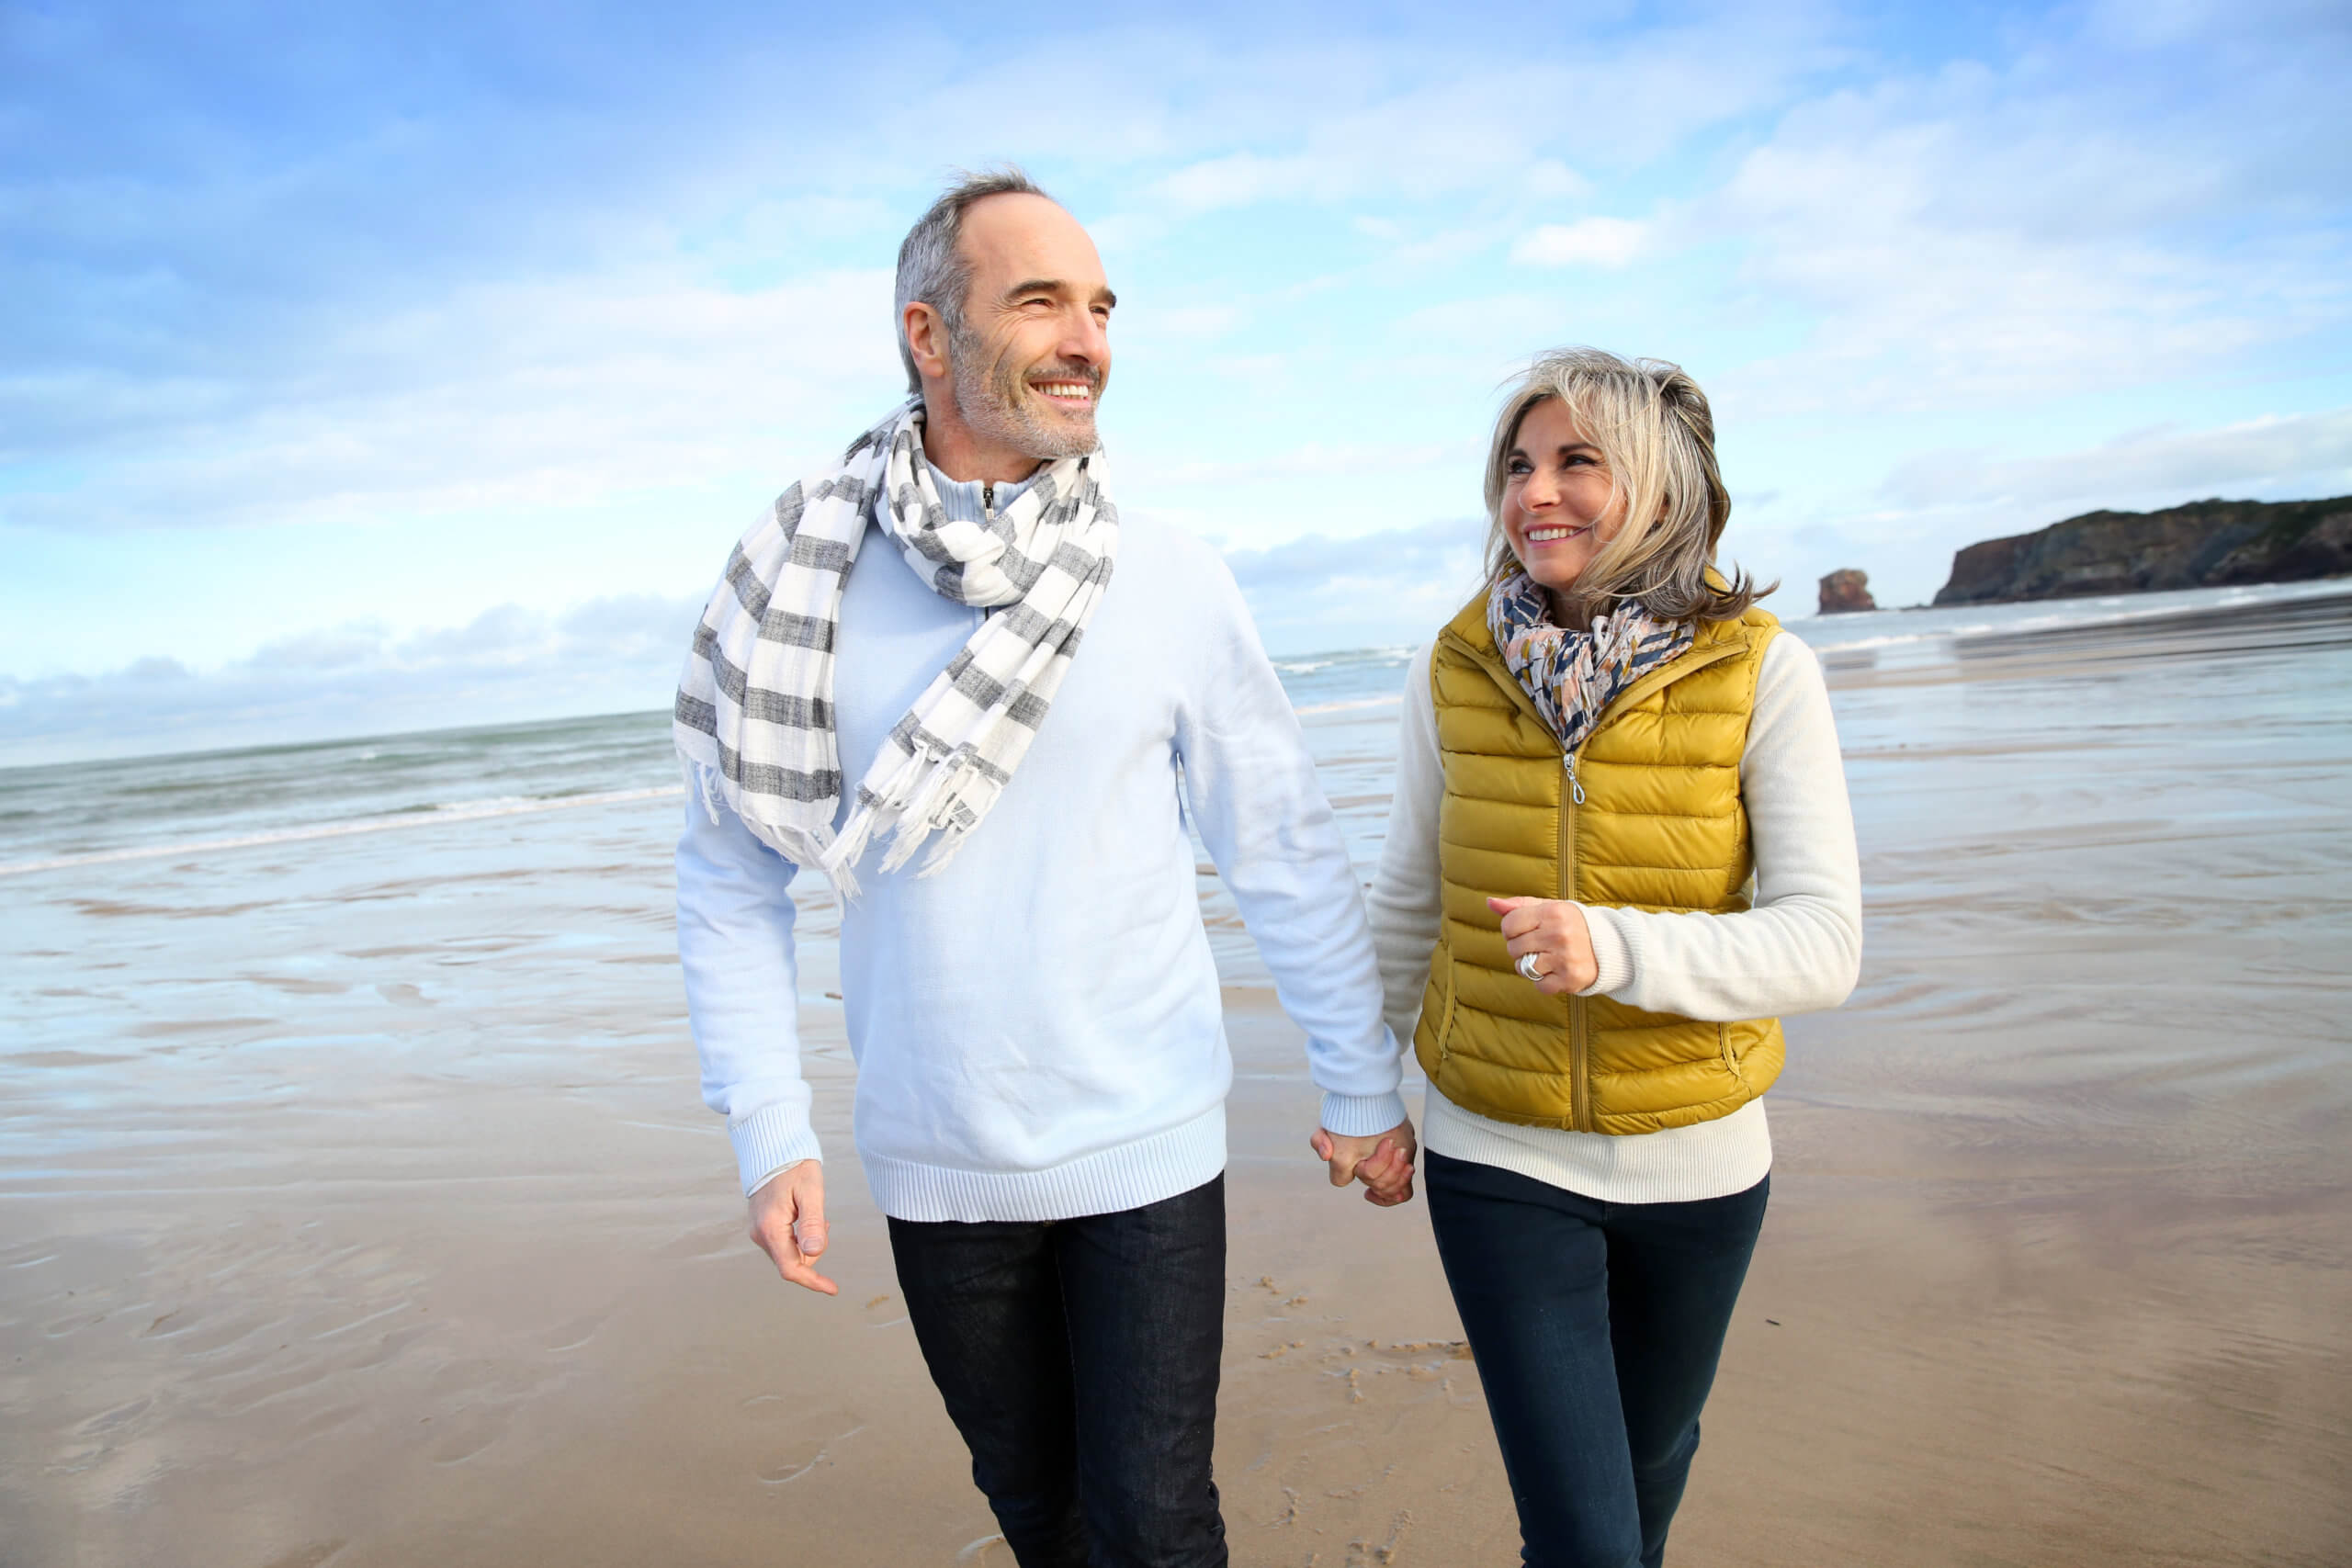 Cheerful older couple walks together holding hands on a beach during cool spring weather.